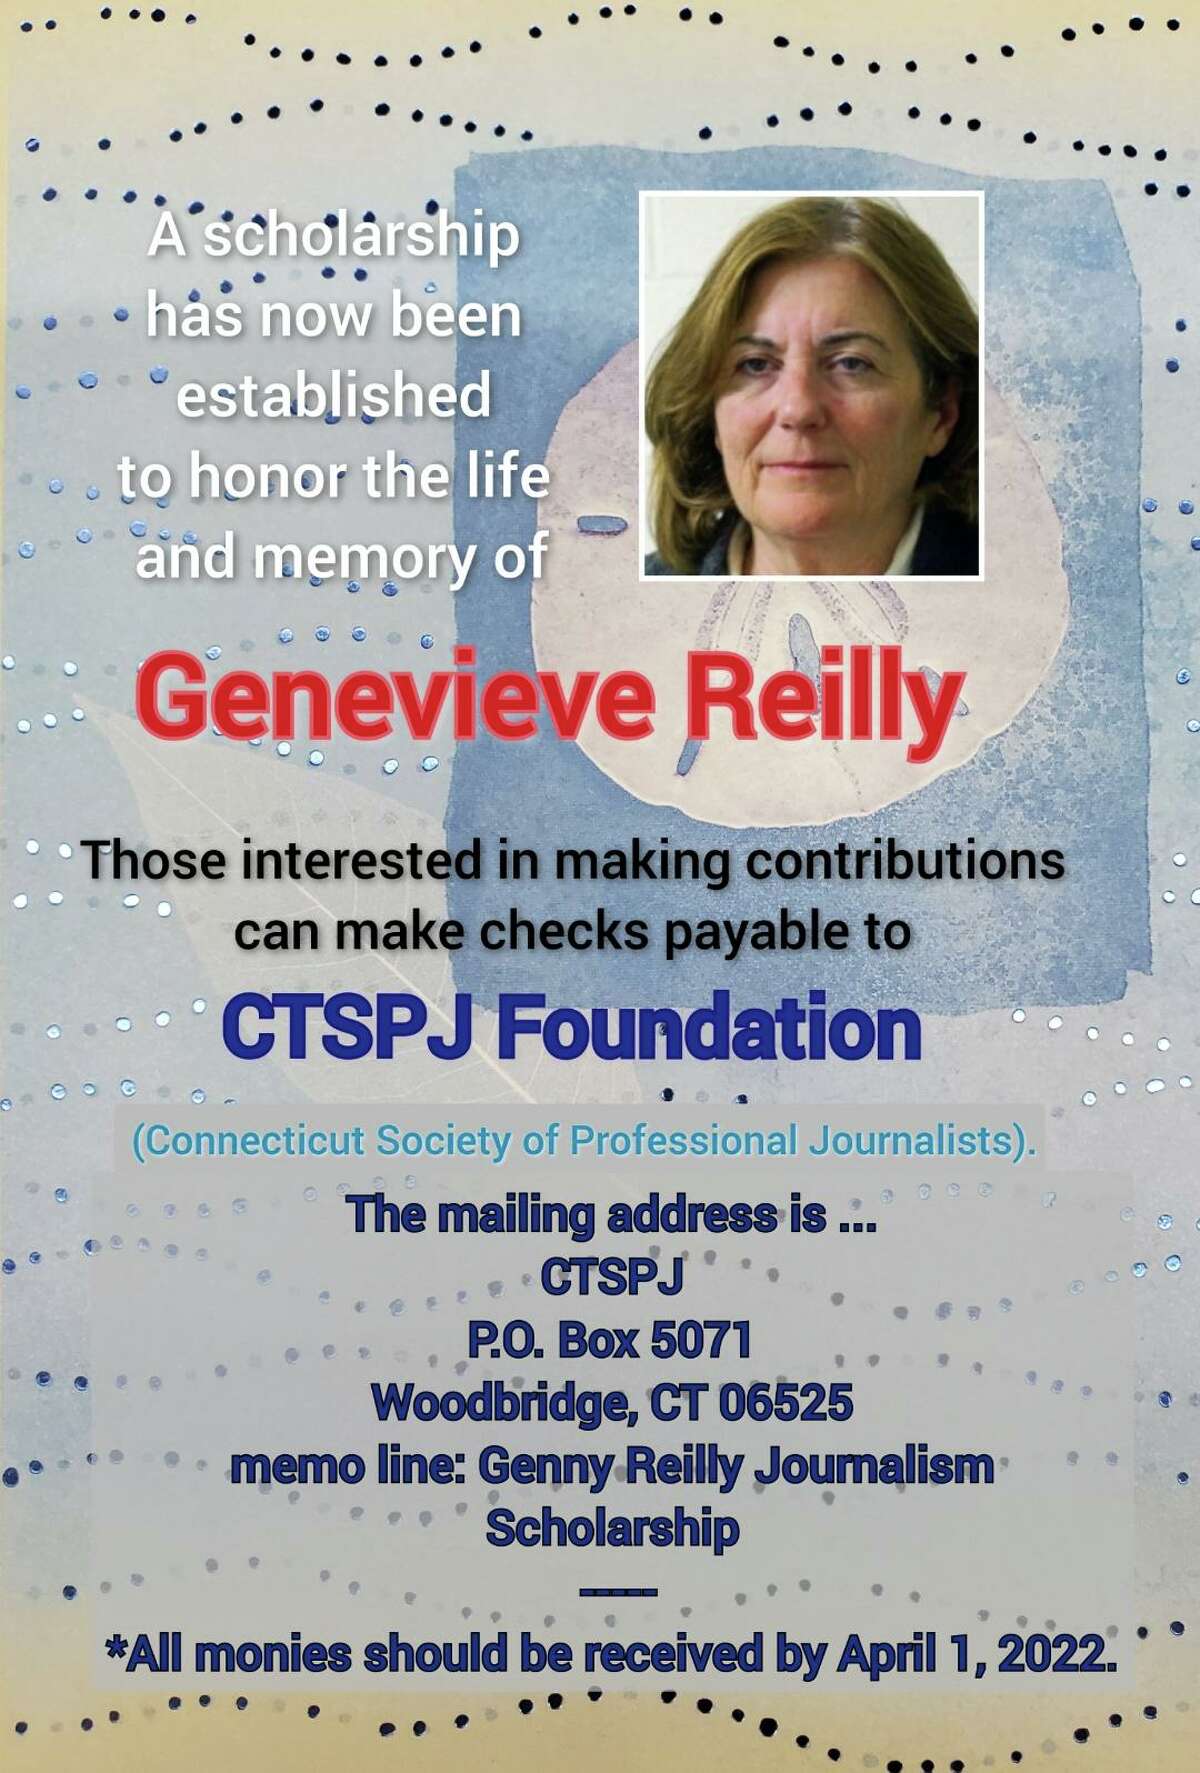 A scholarship has now been established to honor the life, and memory of Genevieve “Genny” Reilly. Reilly passed away suddenly in September at age 62. Reilly was a former employee of Hearst Connecticut Media. She was a longtime reporter for the Fairfield Citizen, and the Connecticut Post. A flyer for the scholarship acceptances for the Genevieve “Genny” Reilly scholarship, with a photo of Genevieve “Genny” Reilly, are shown.